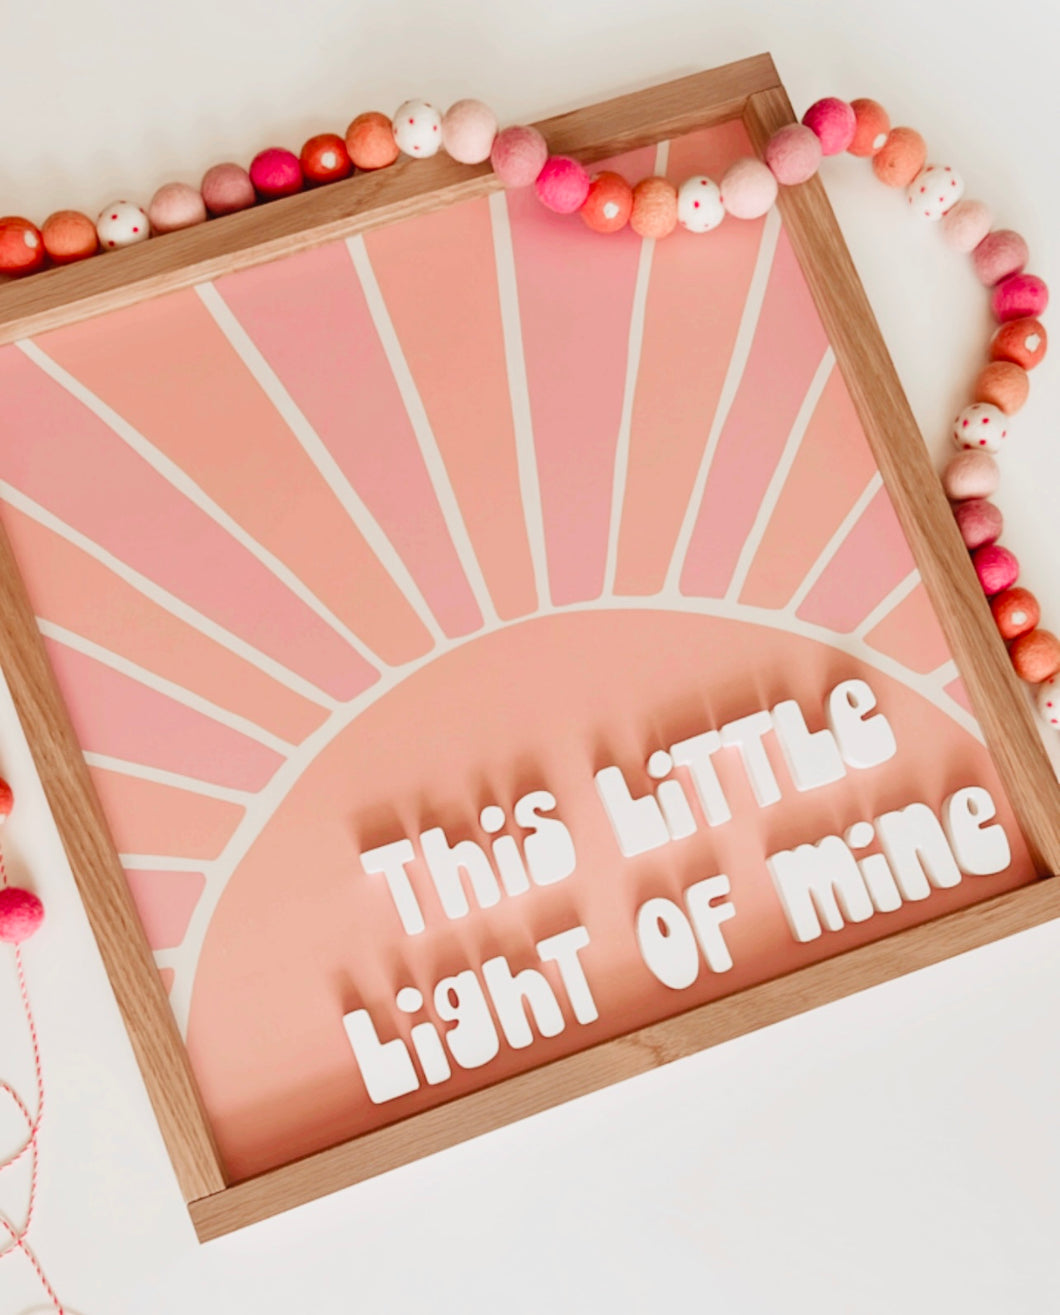 This little light of mine- pink